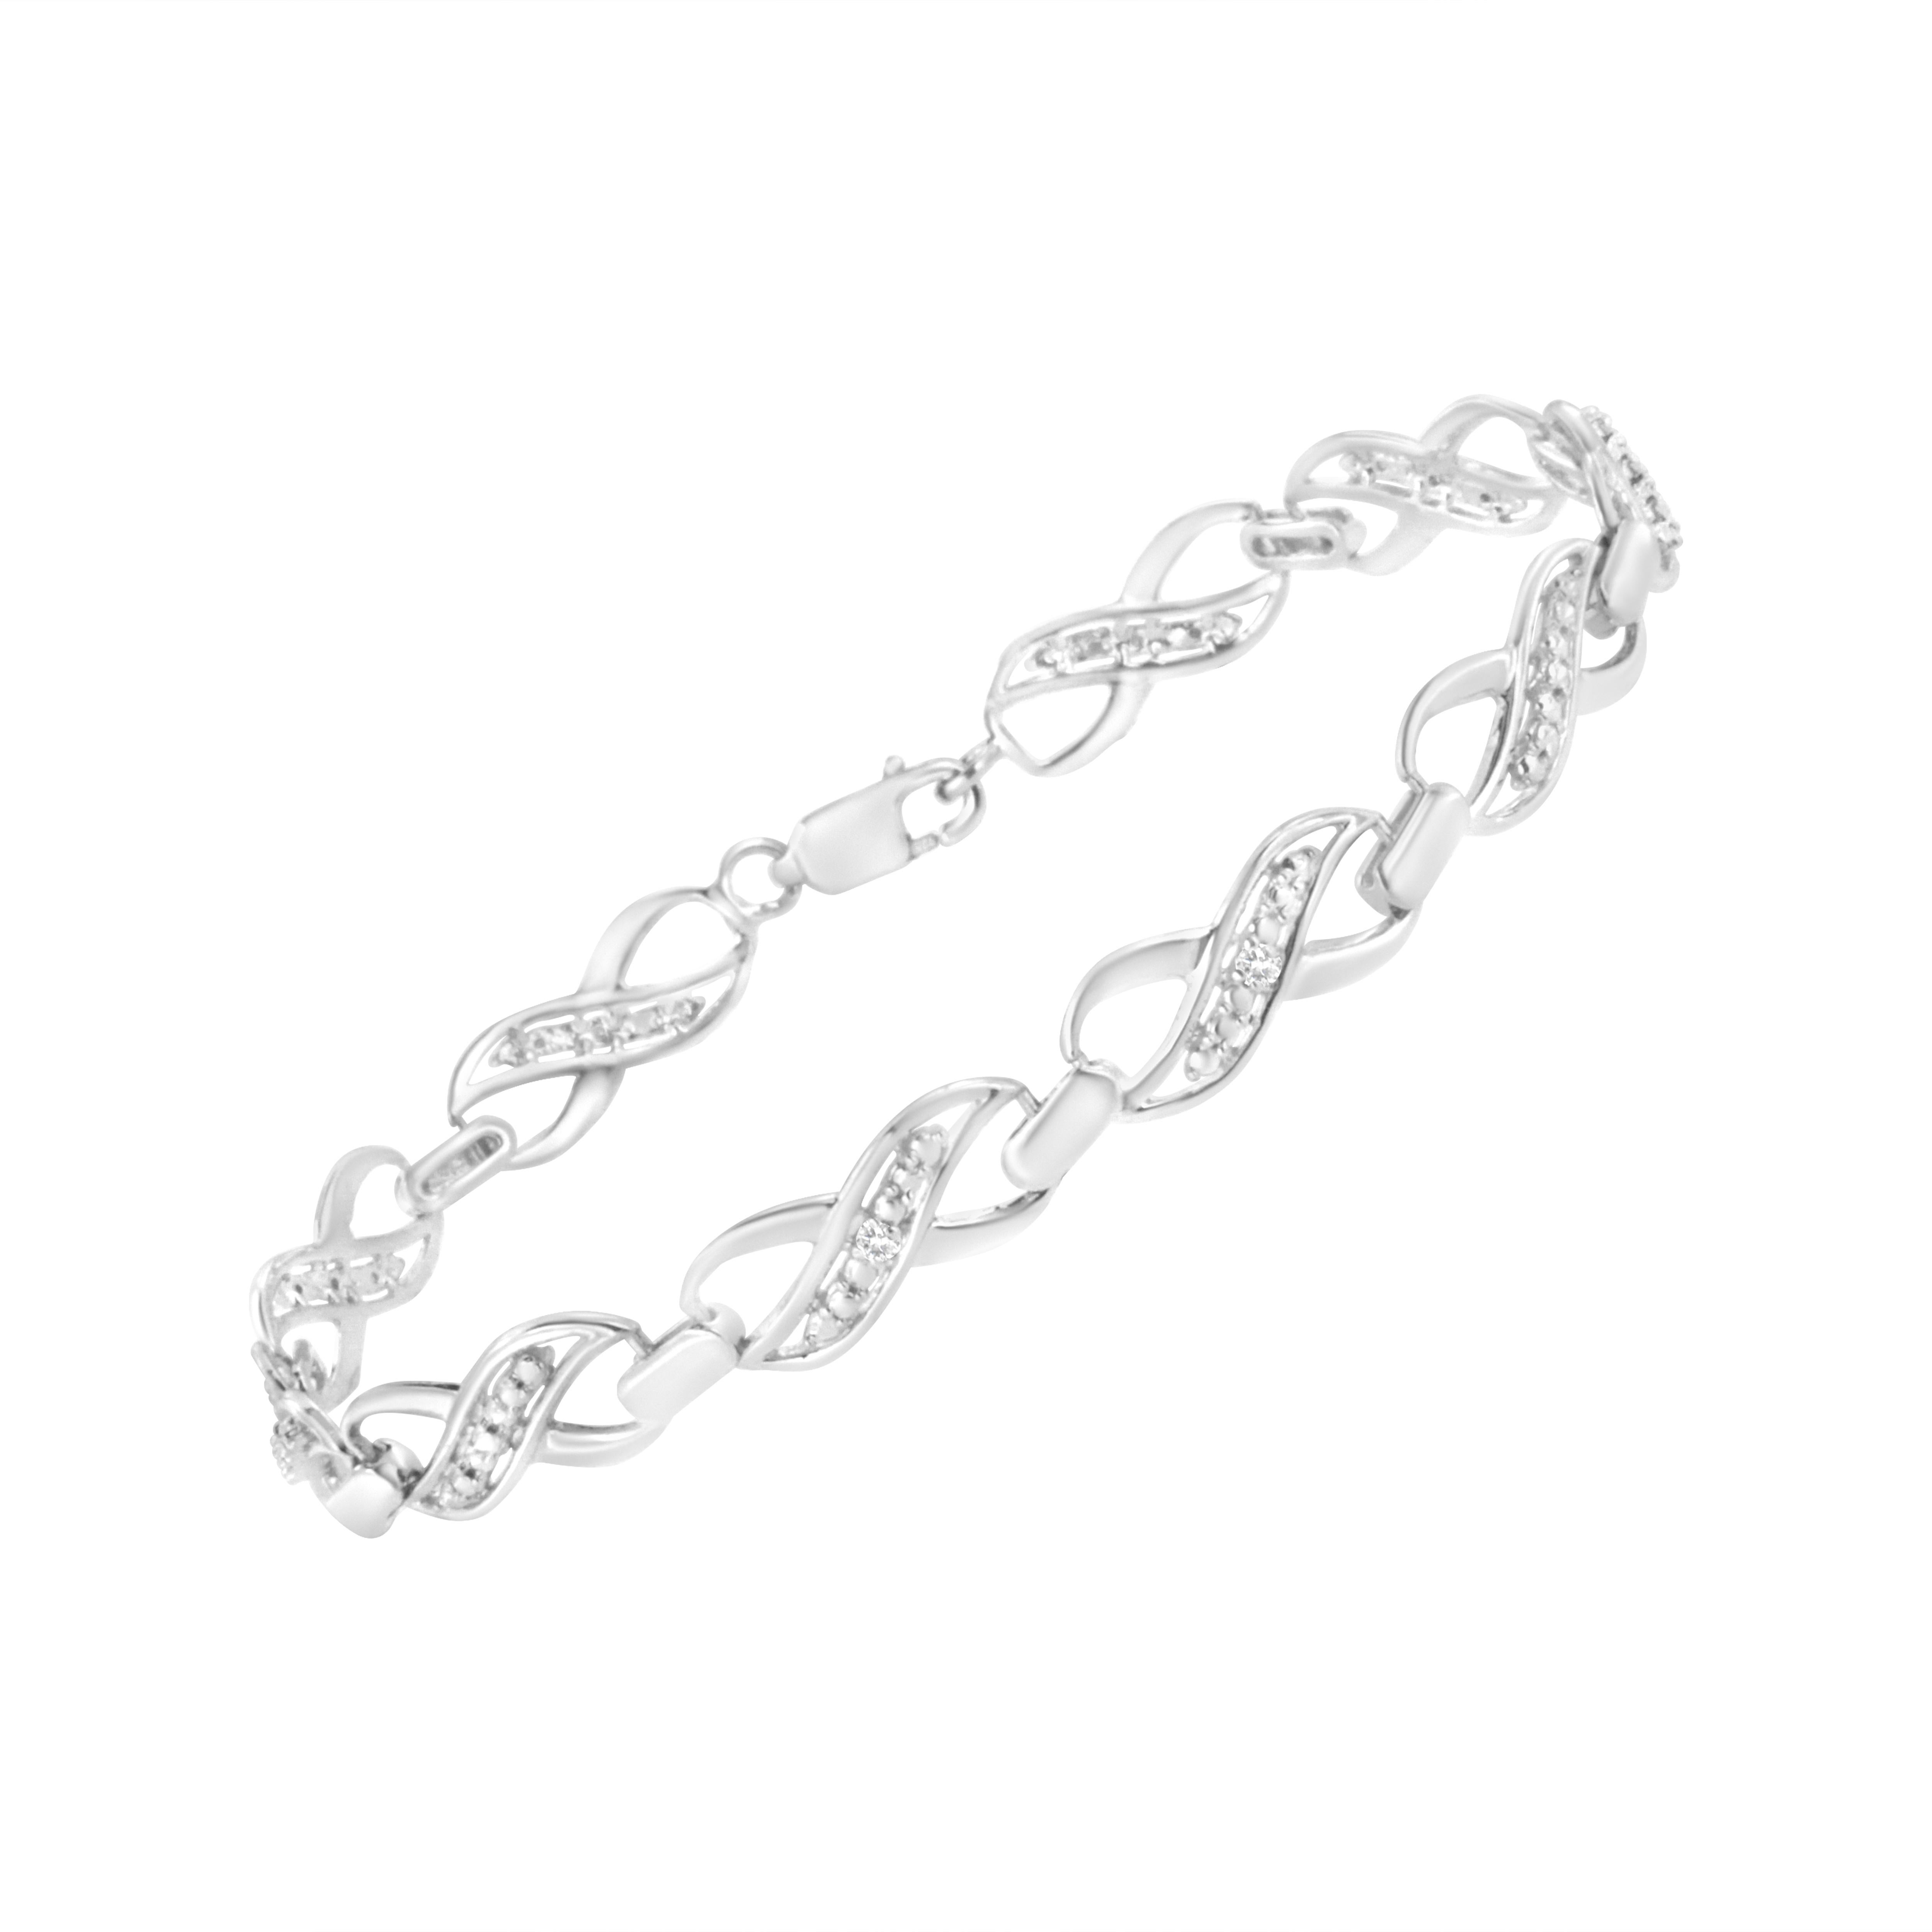 Treat yourself to this elegant and refined infinity link bracelet. Created in cool .925 sterling silver, this piece is designed with silver infinity links with a streak in the middle of round-cut diamonds. This prong set, diamond accent piece is